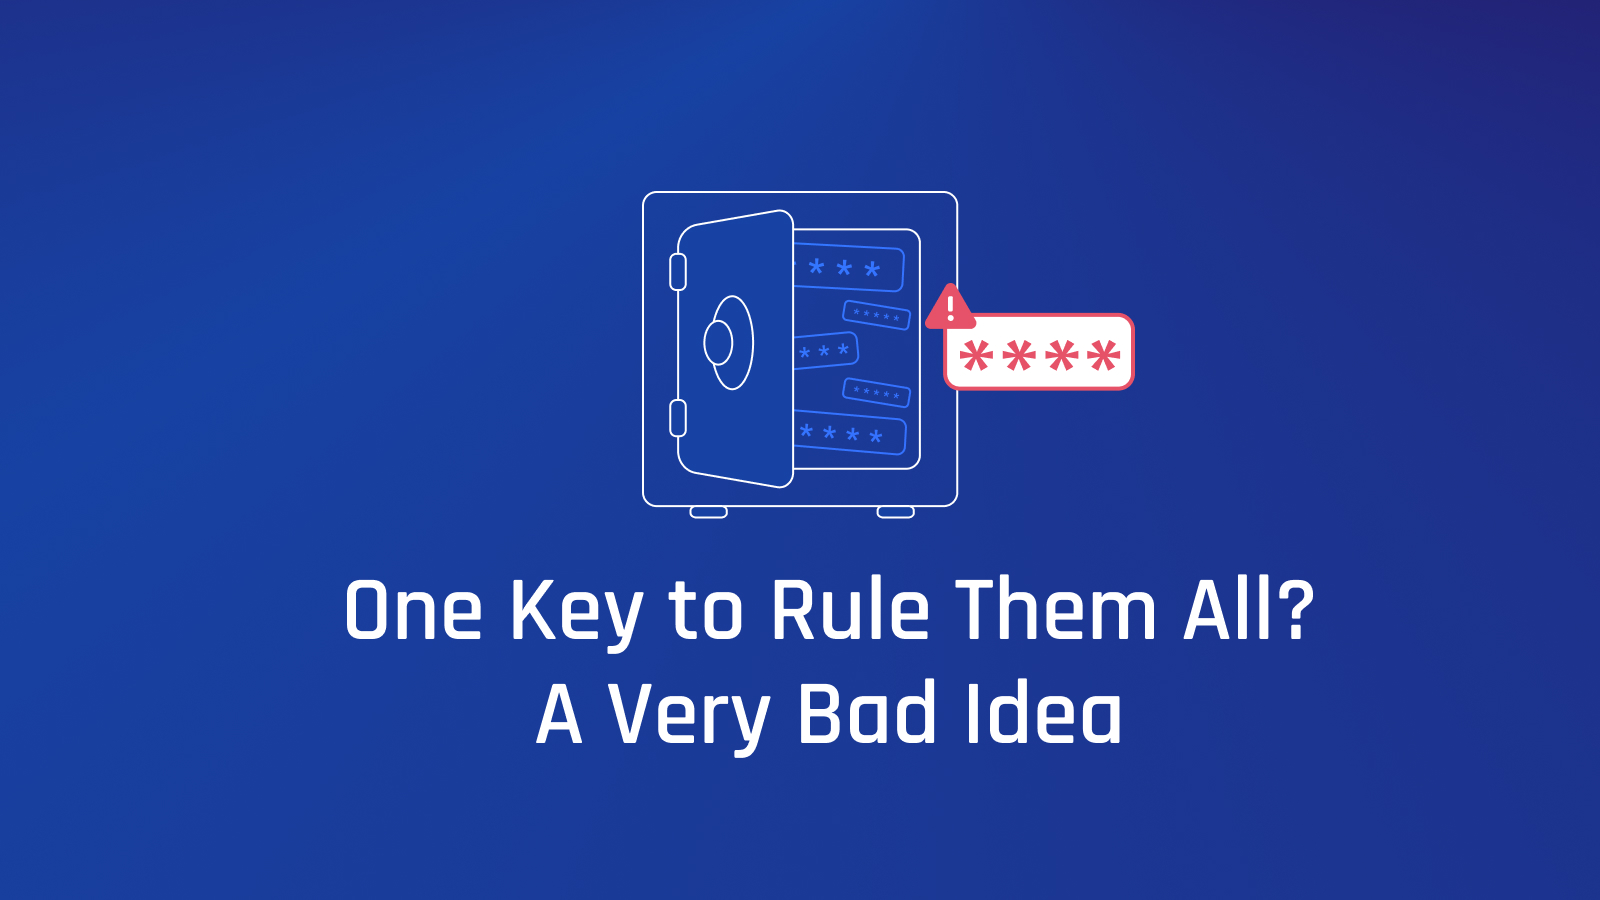 One Key to Rule Them All? Bad